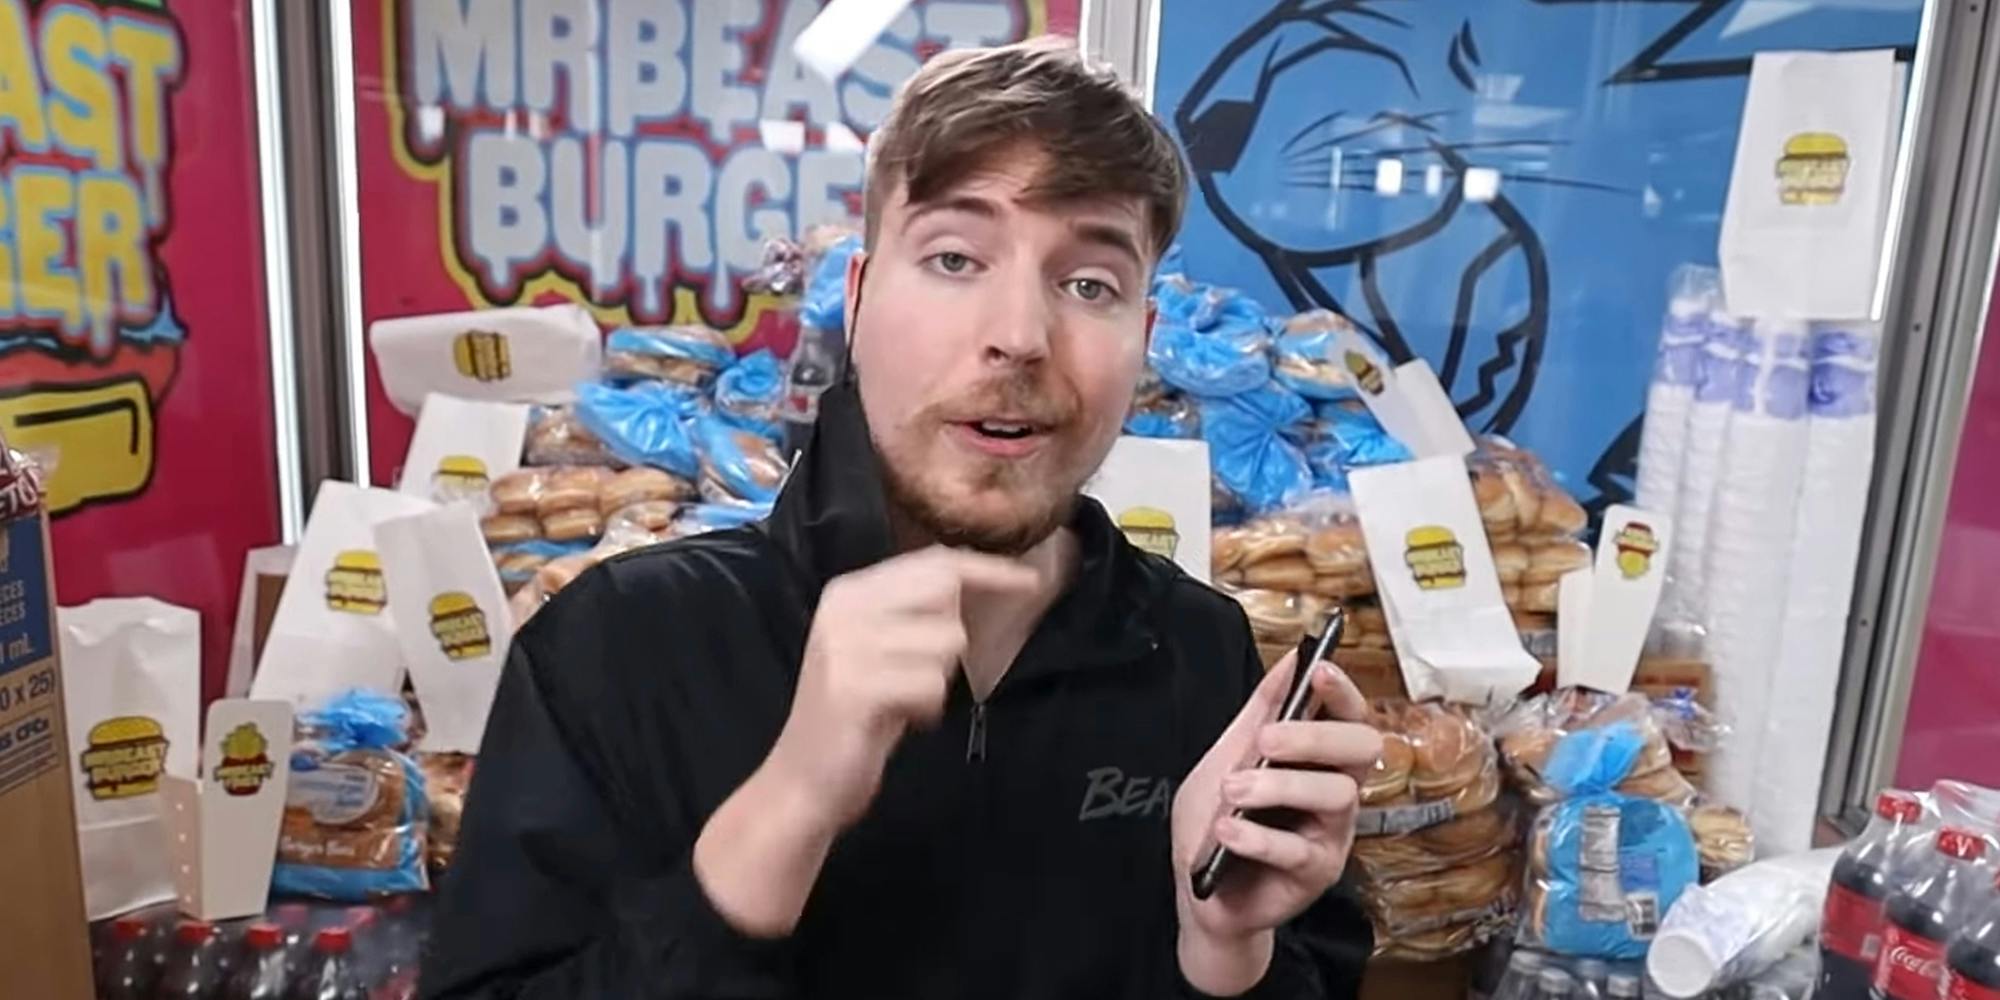 MrBeast Sues Company Behind 'MrBeast Burger' with Lawsuit Over 'Inedible'  Food 